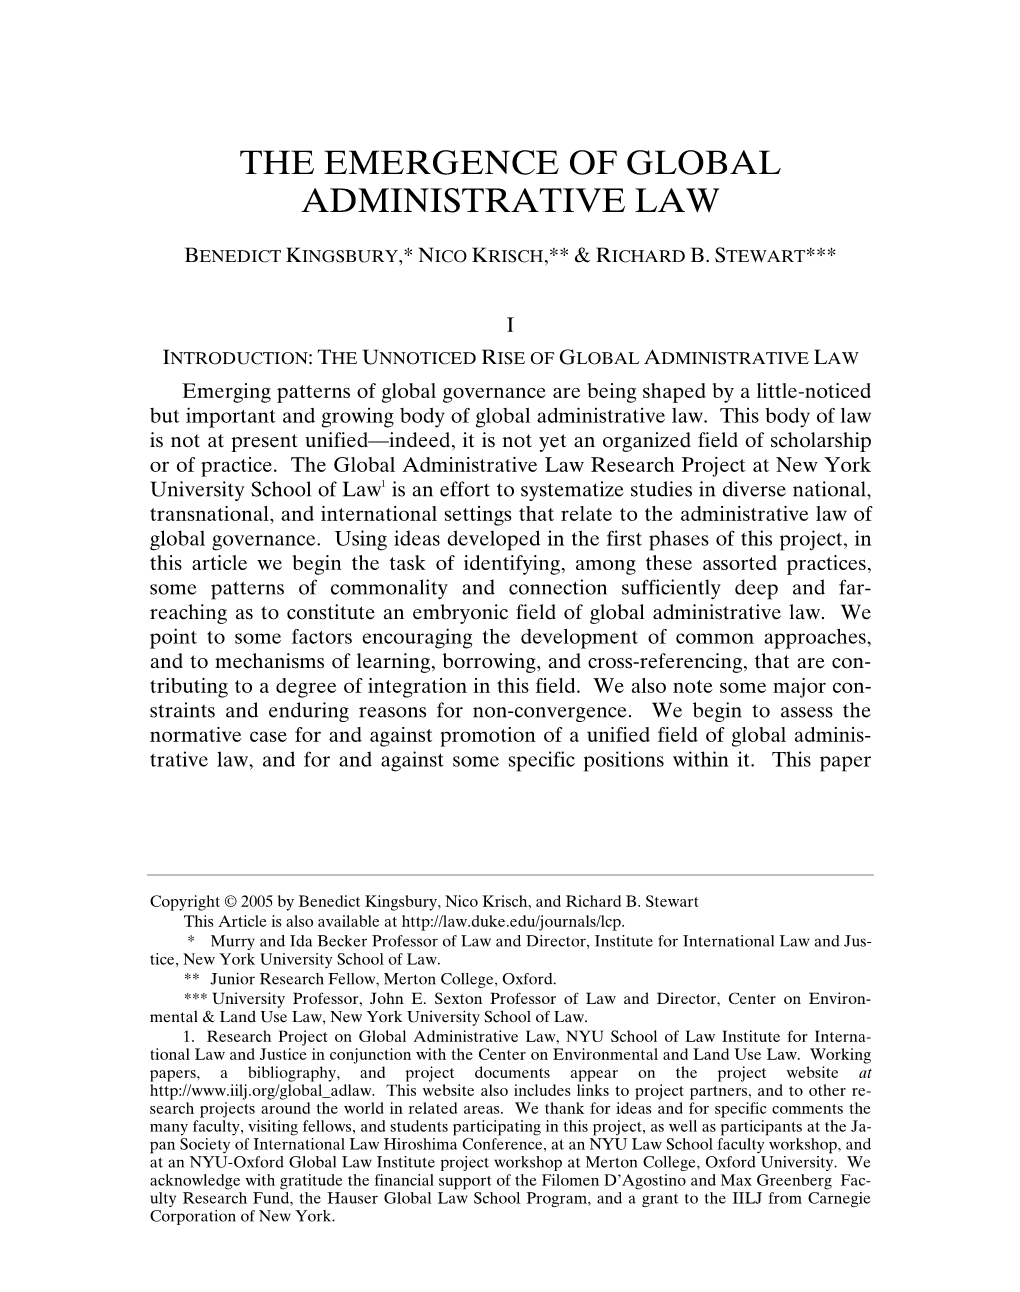 The Emergence of Global Administrative Law